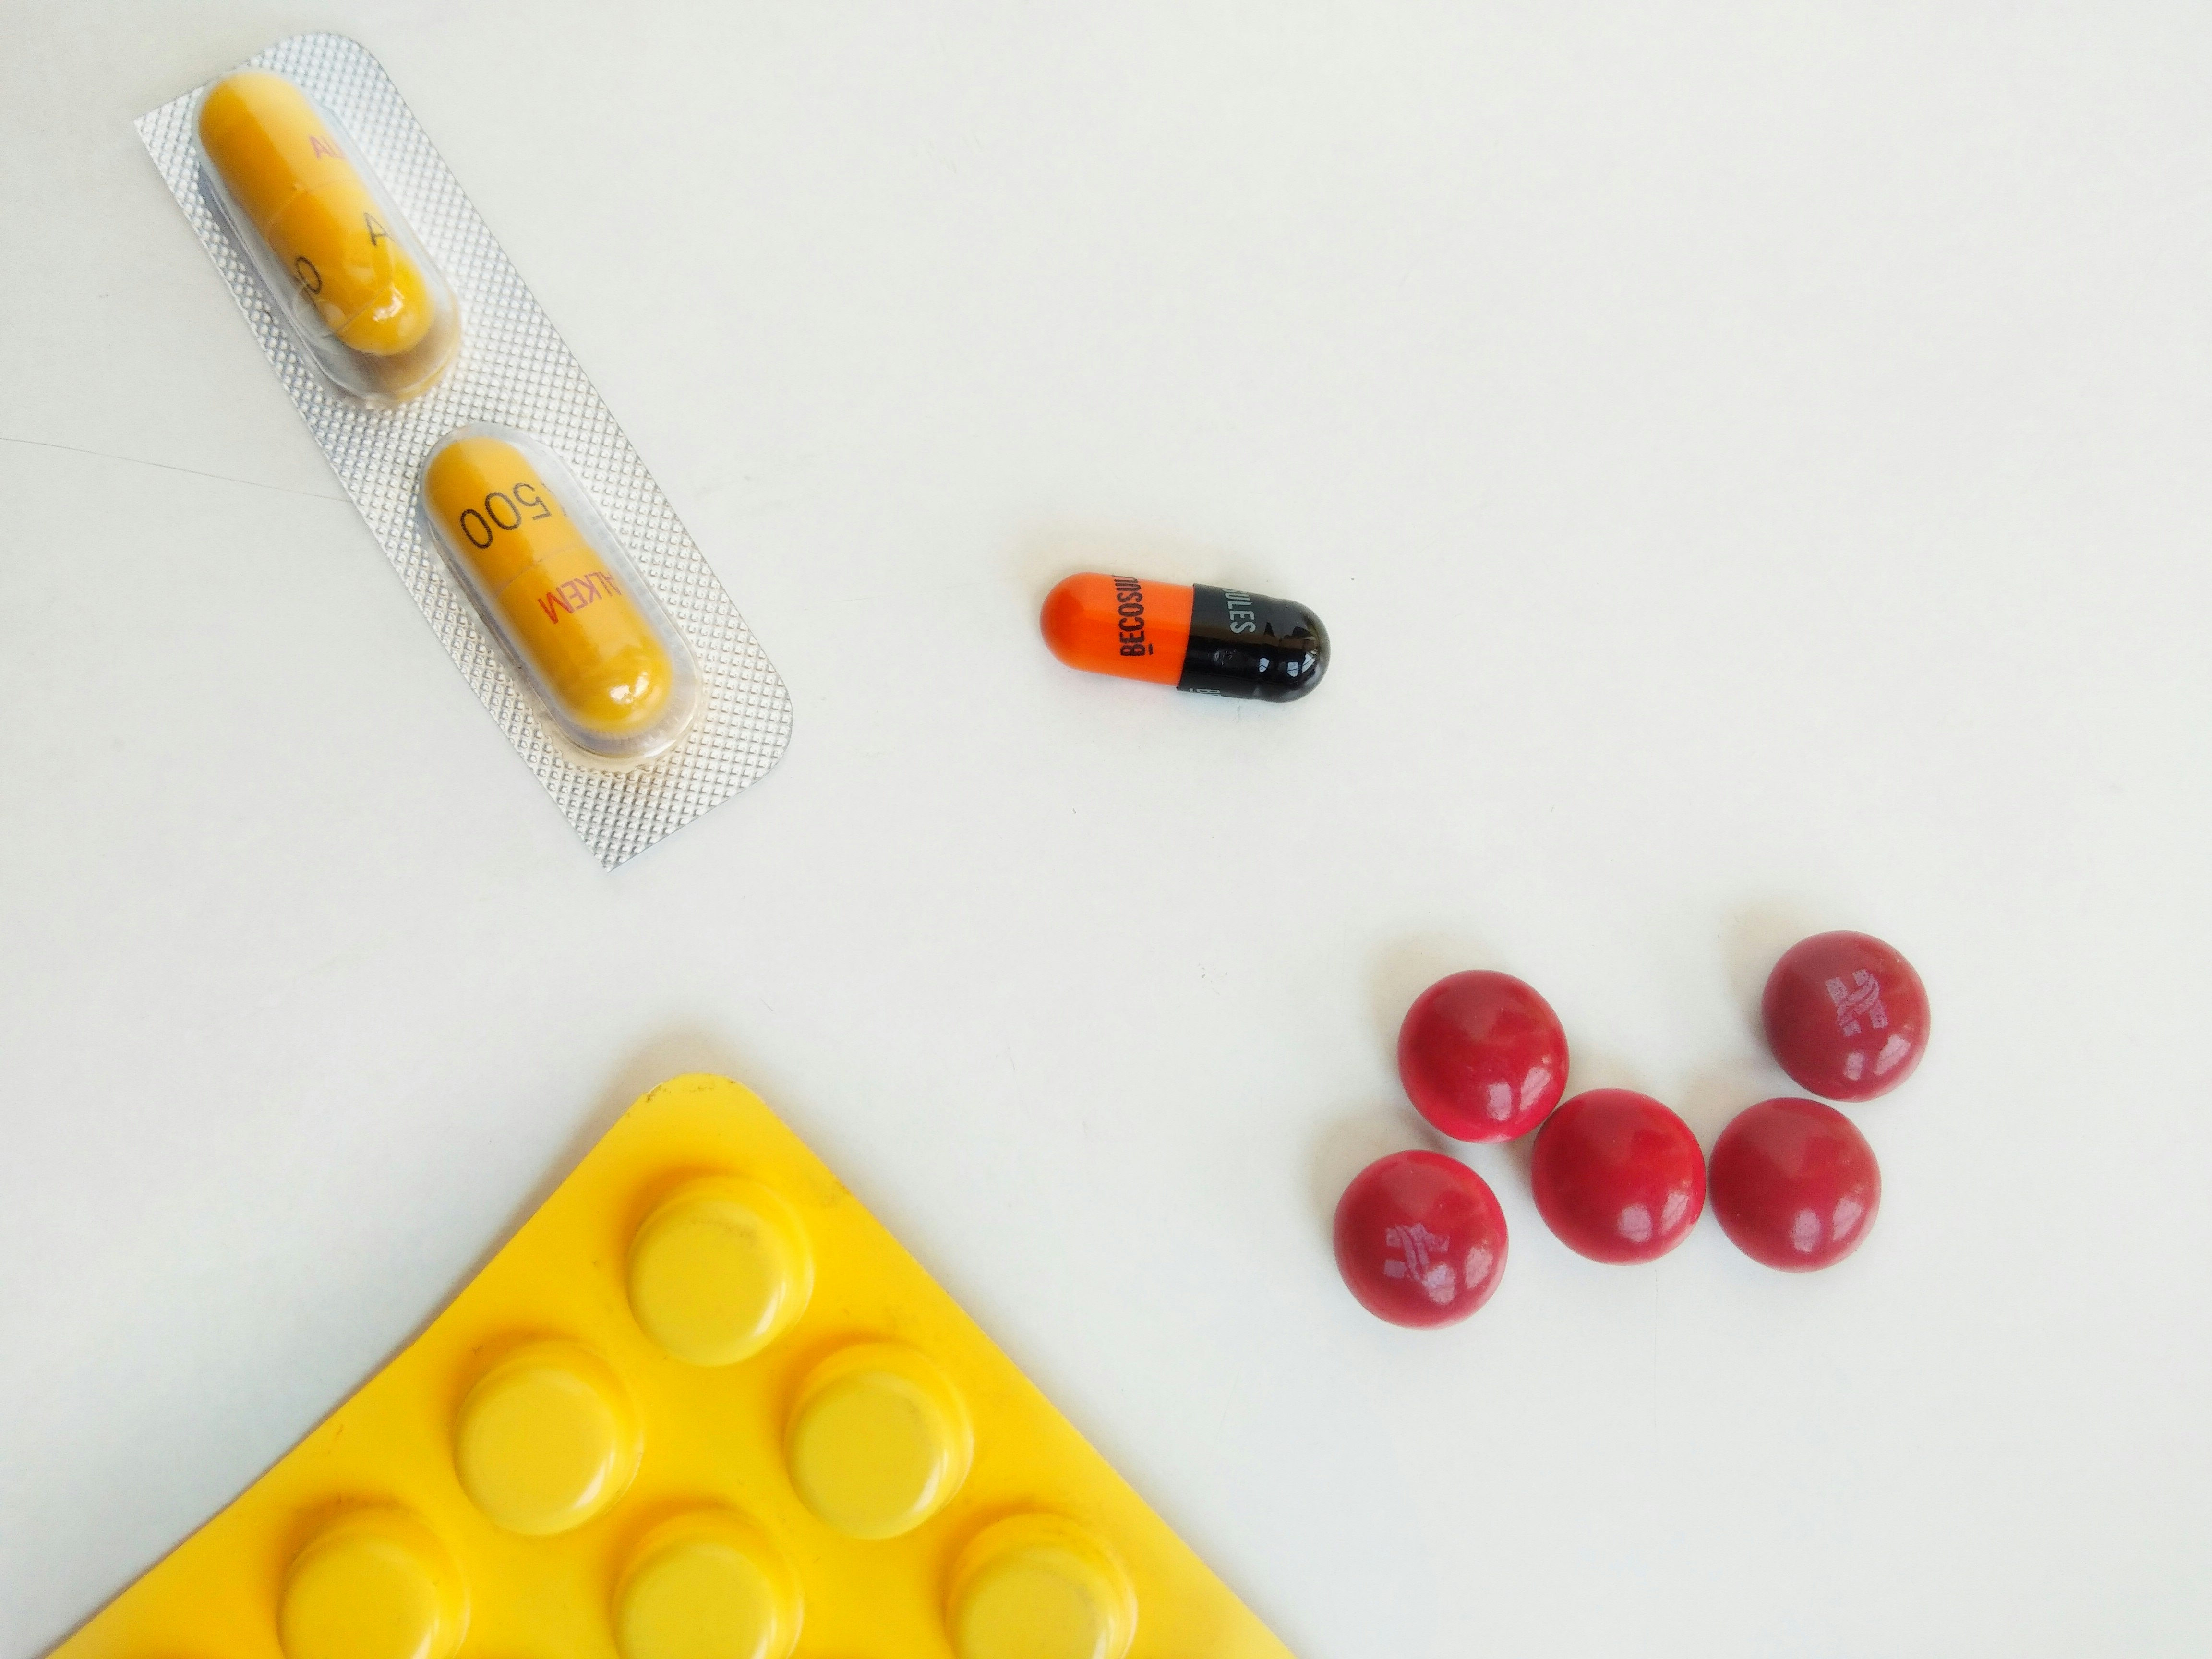 red and yellow medication pill blister pack